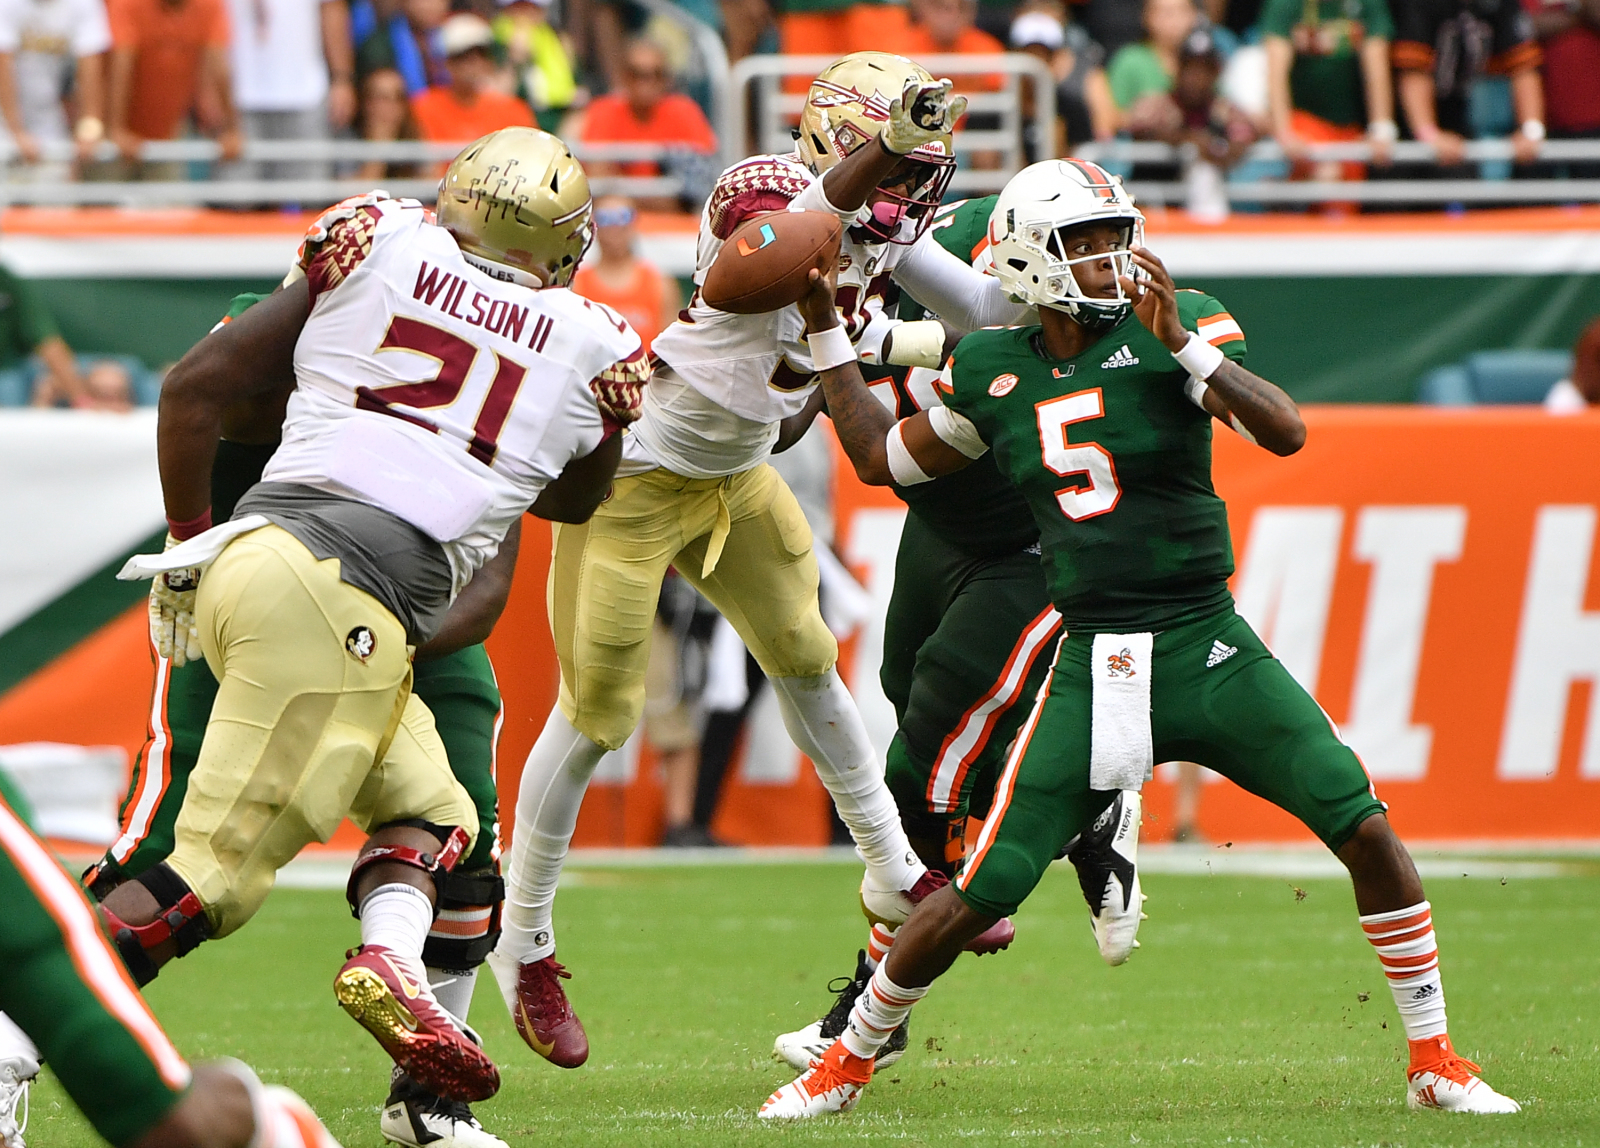 Report: FSU defensive end Brian Burns leaving early for NFL Draft